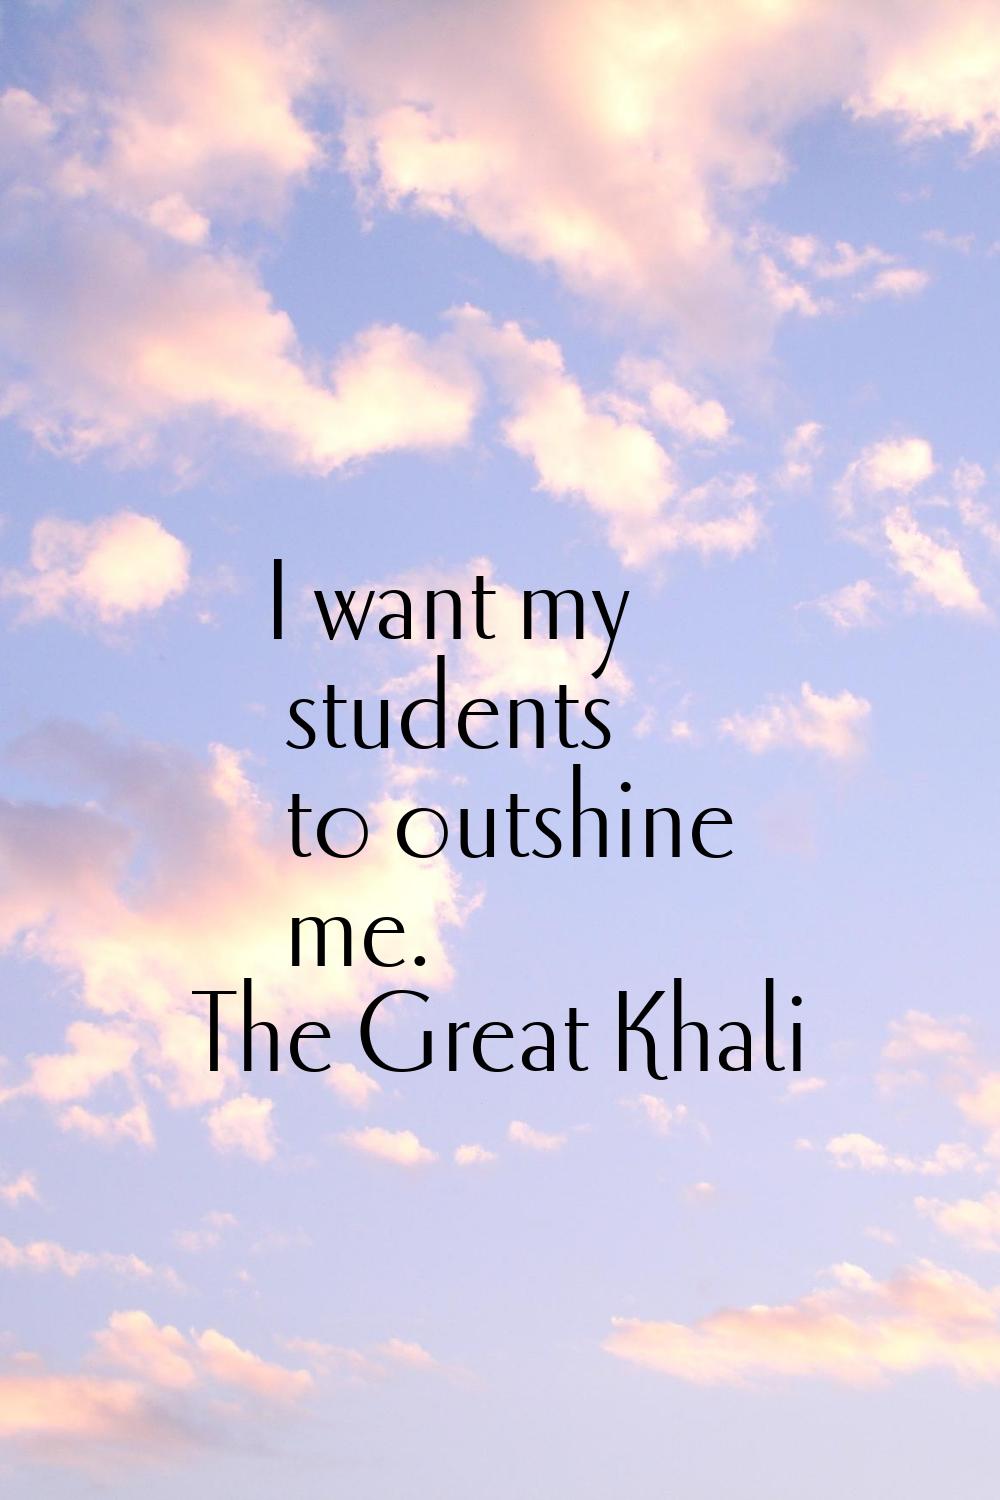 I want my students to outshine me.